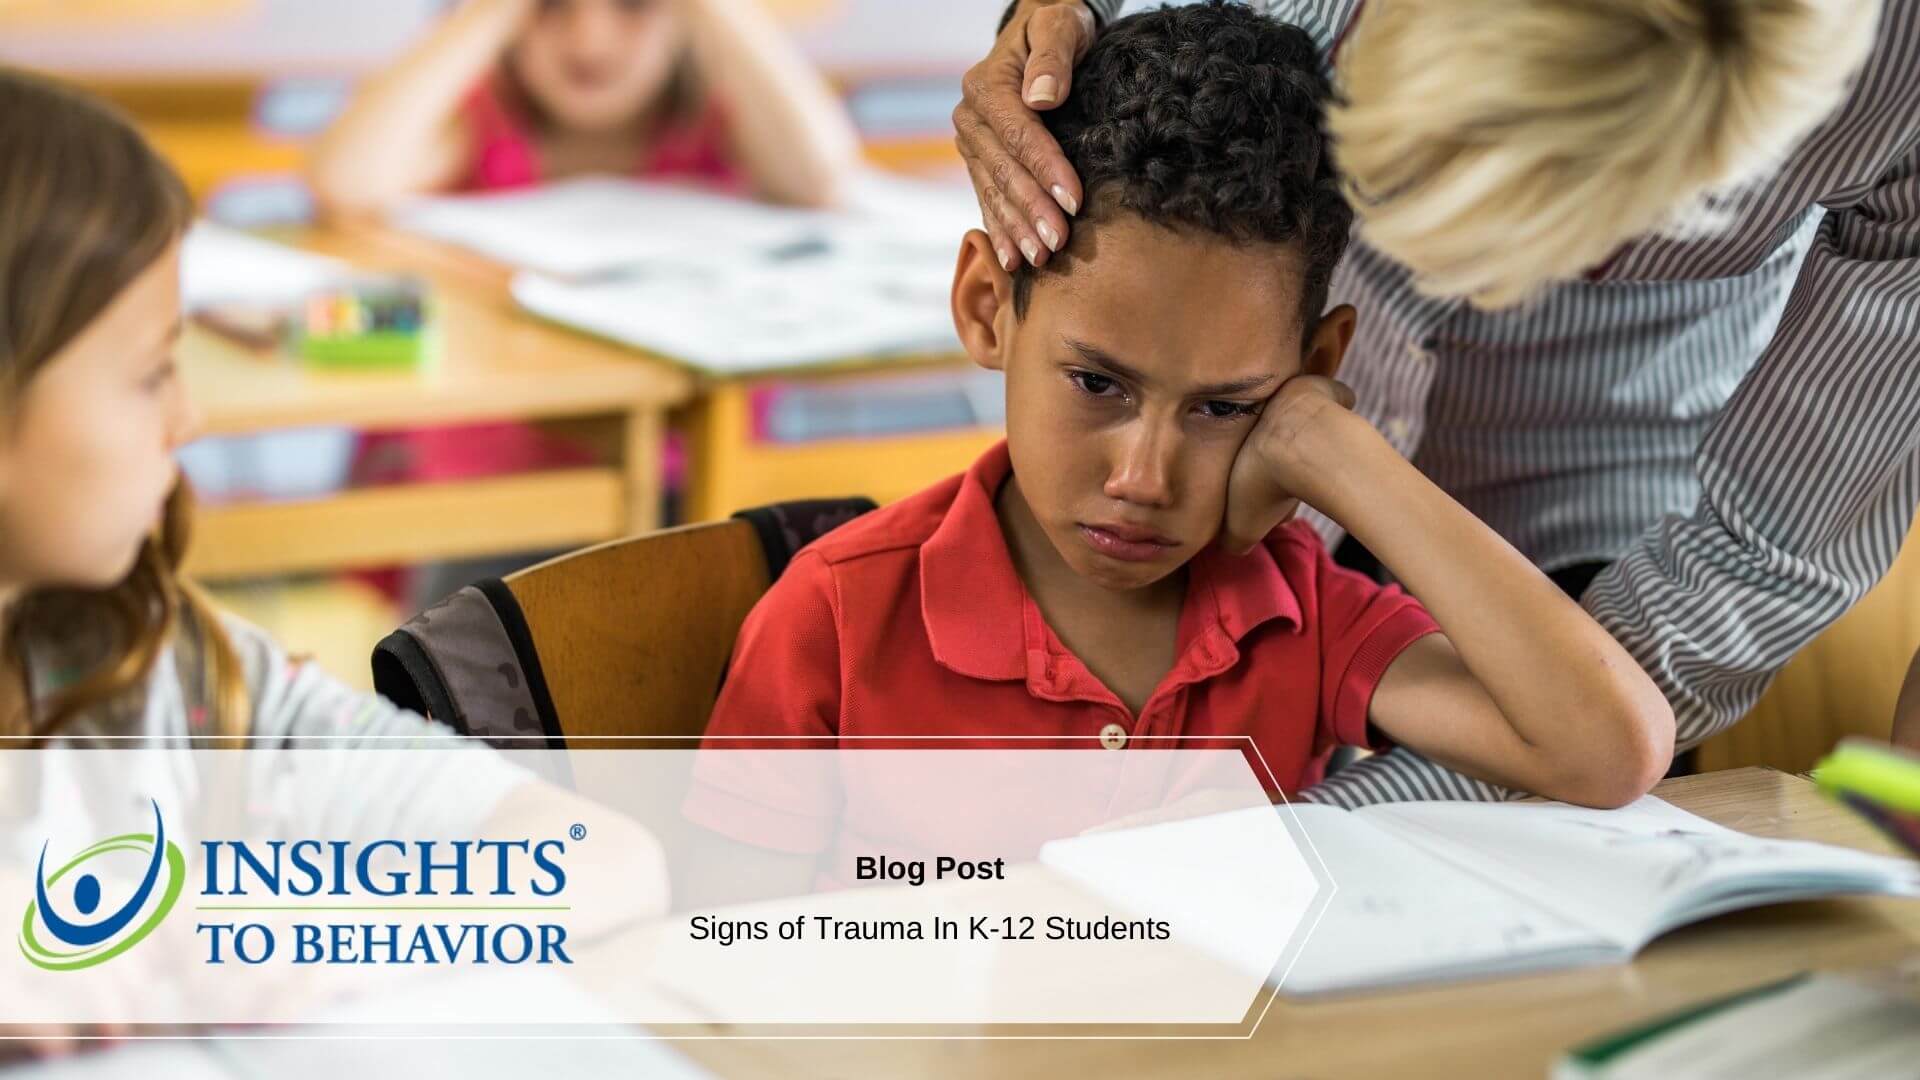 signs of trauma in k-12 students